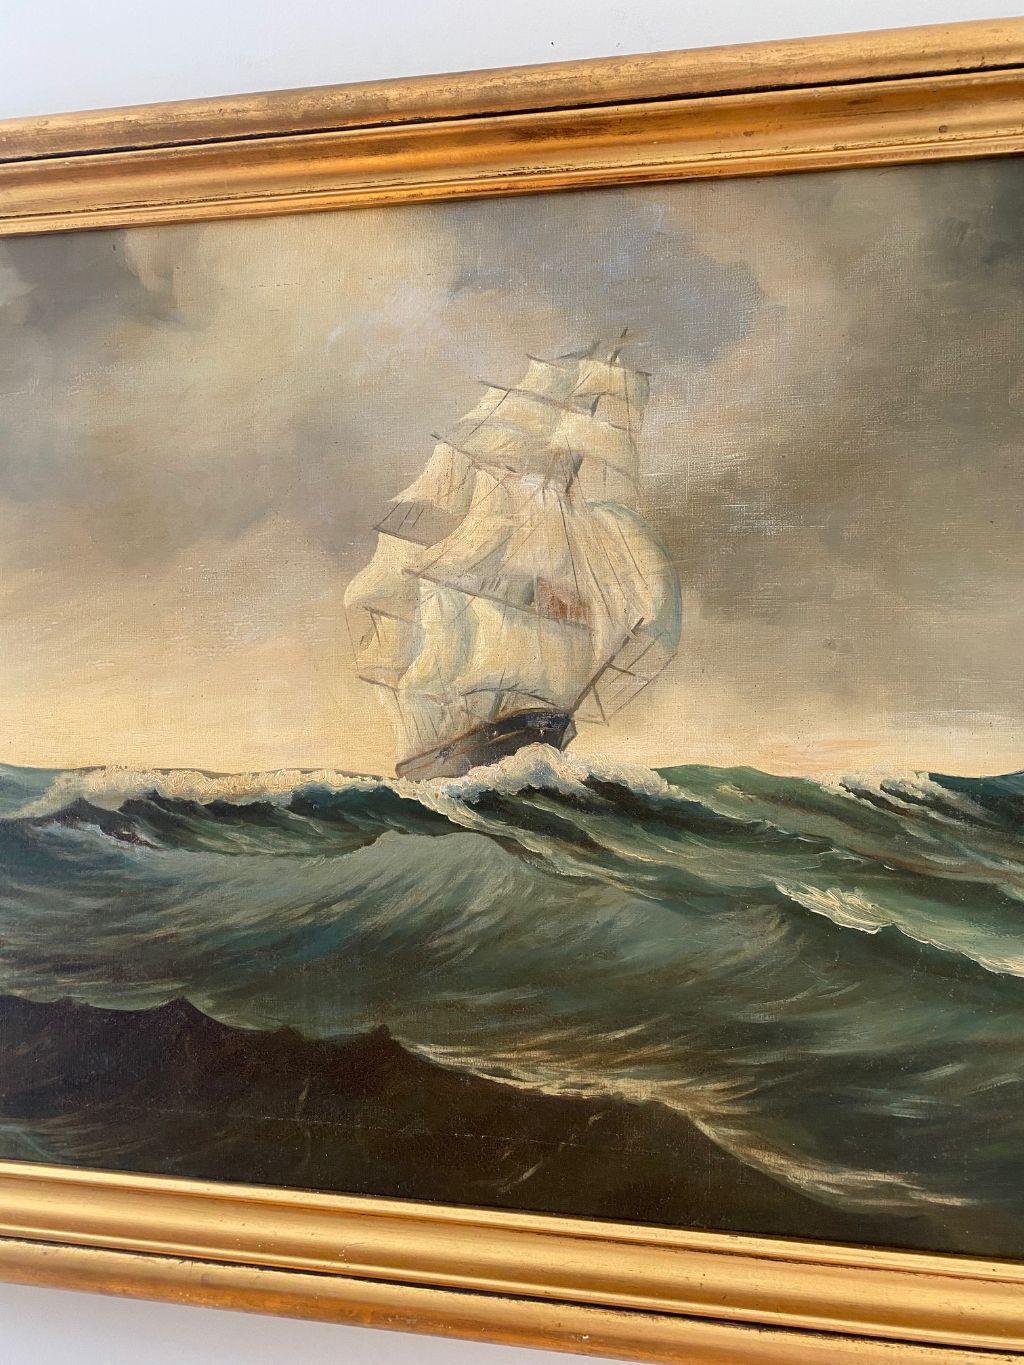 Other Seascape with Square Rigger on the High Seas, by Salvatore Colacicco